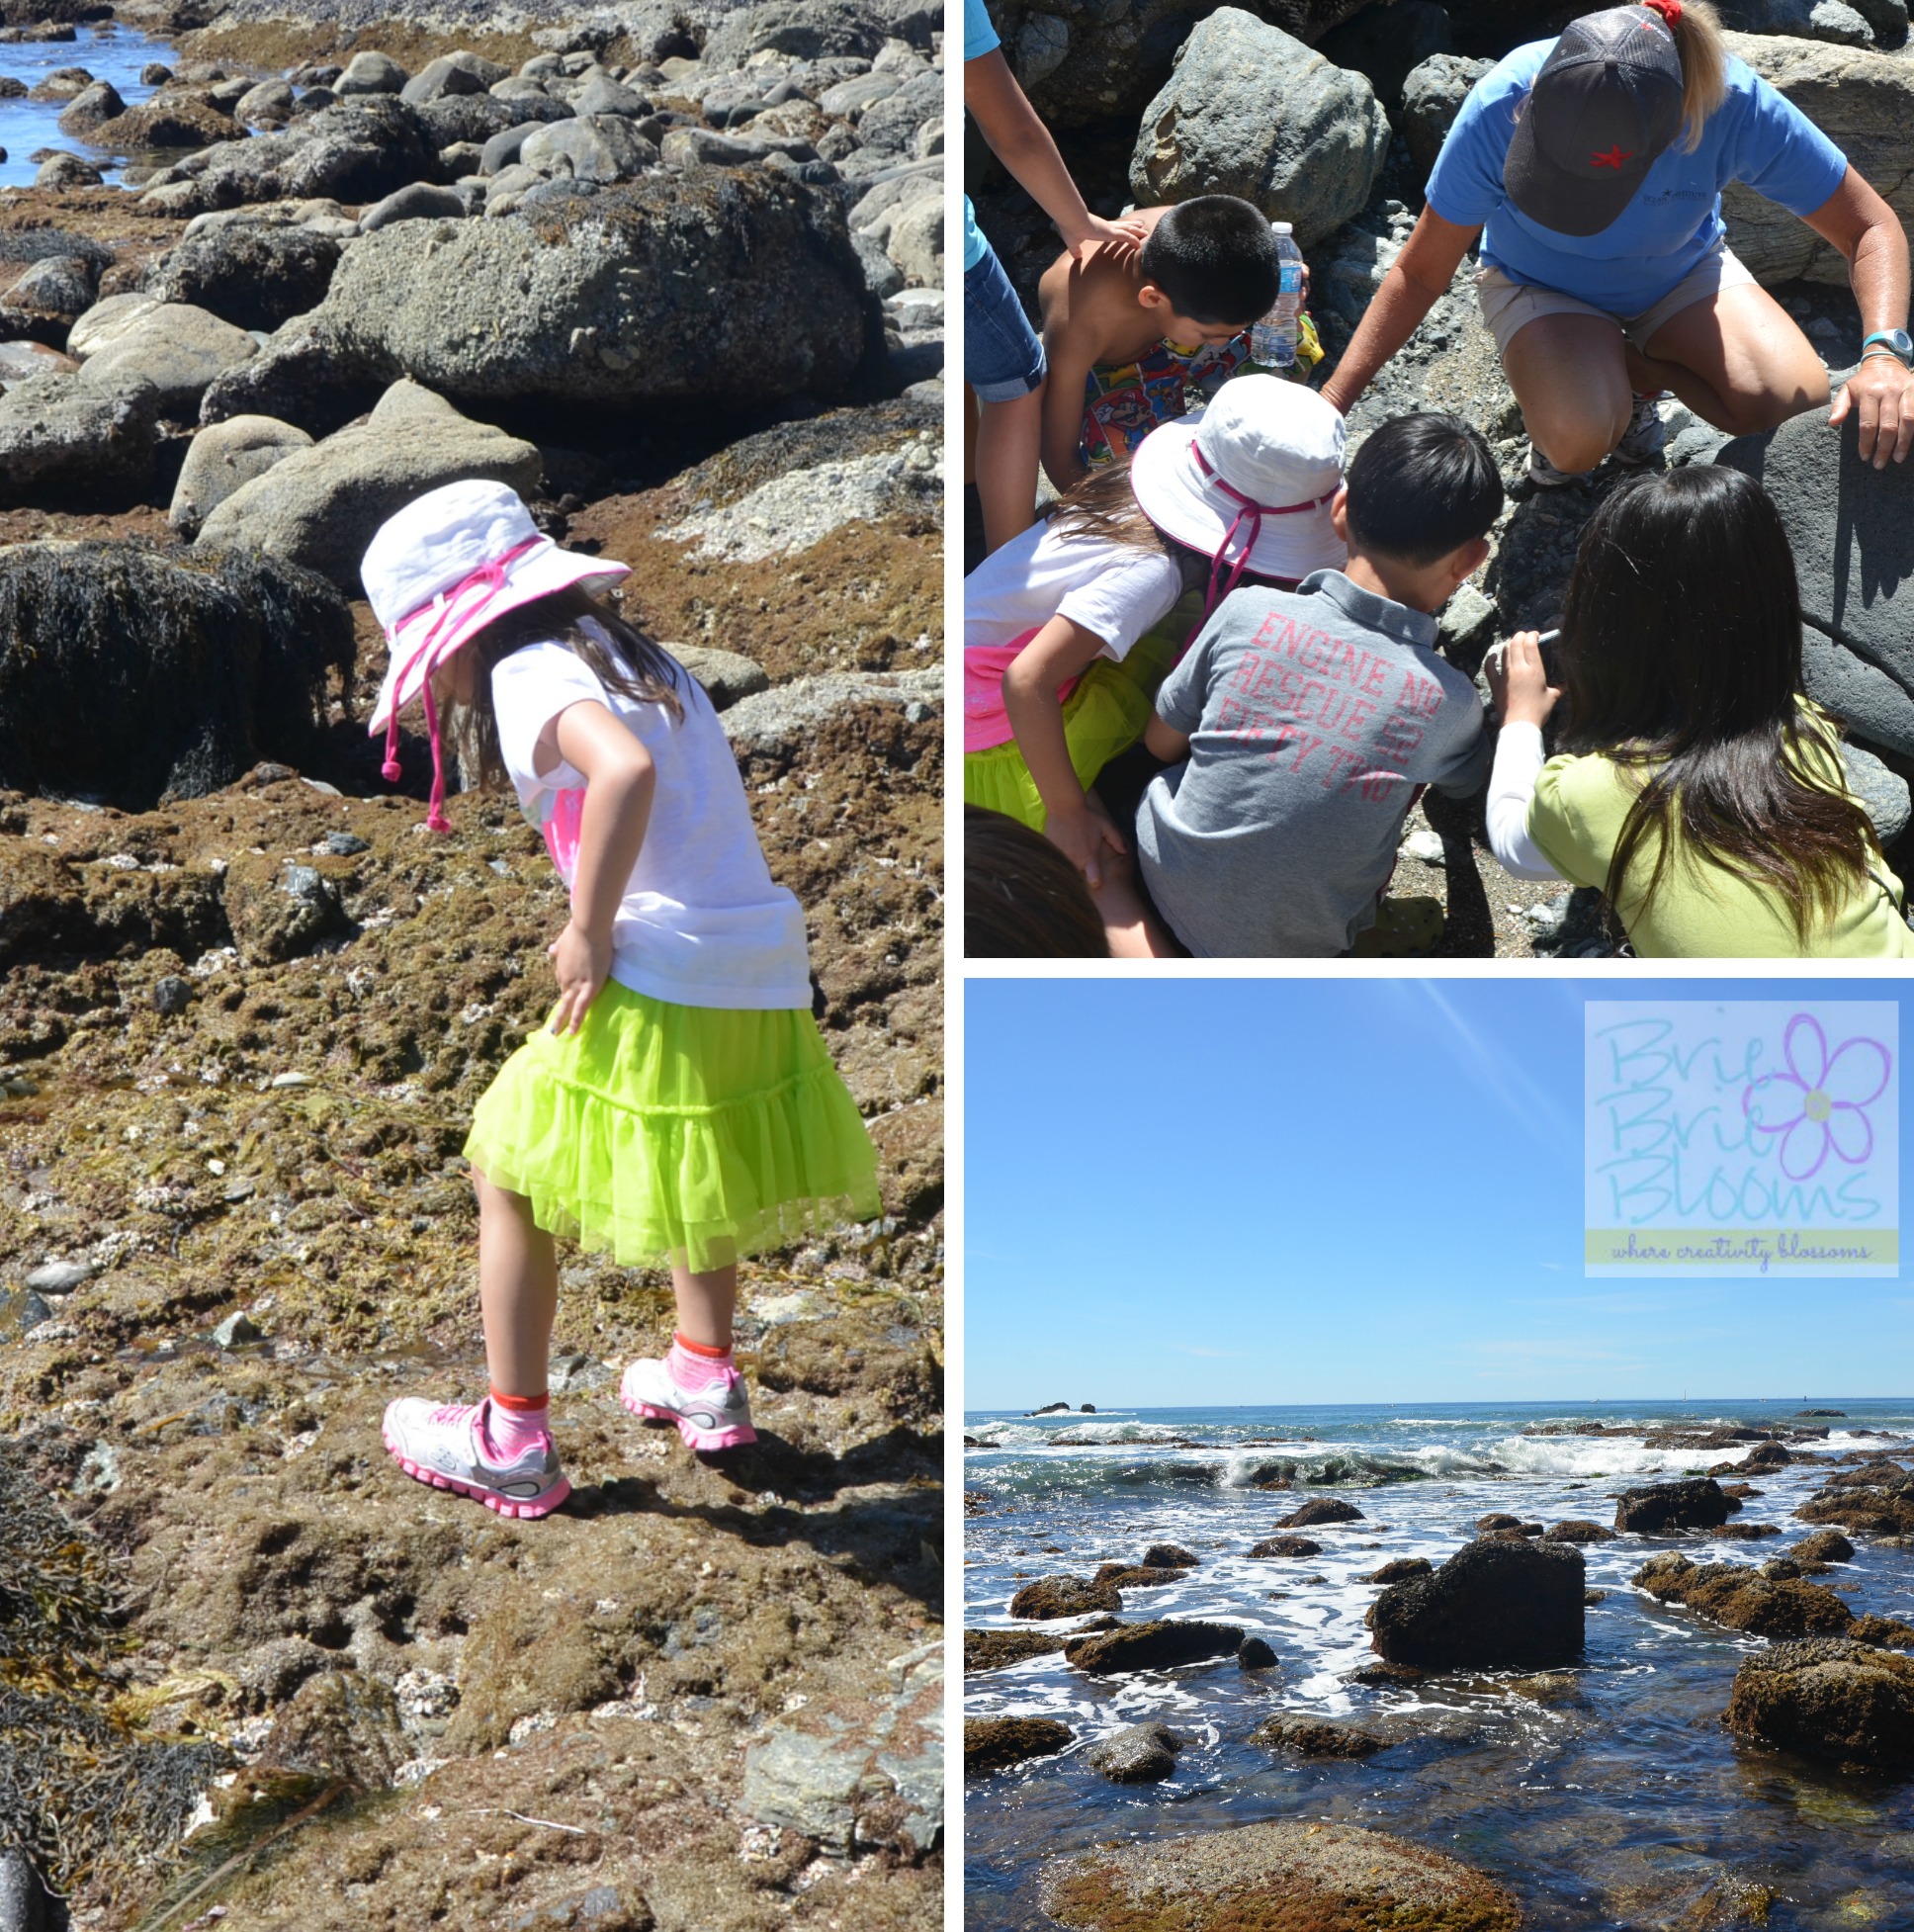 Interactive tide pool hike at the Ocean Institute in Dana Point